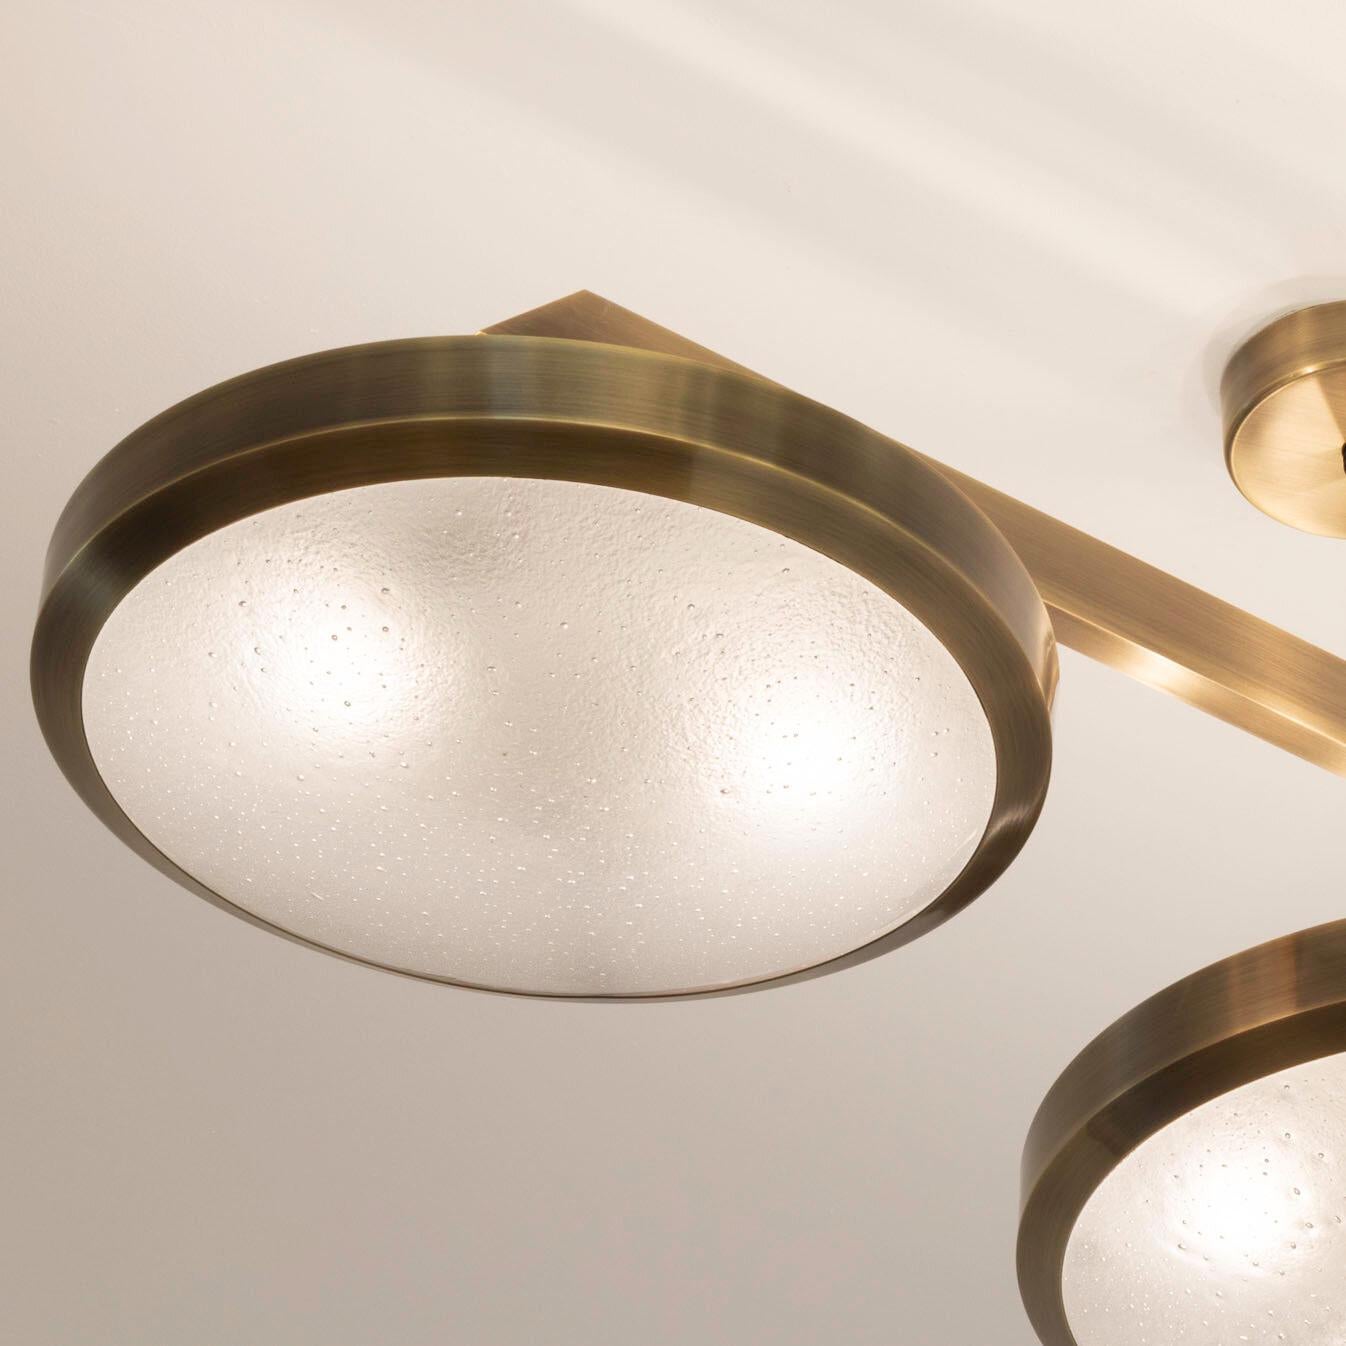 Zeta Ceiling Light by Gaspare Asaro-Satin Brass Finish For Sale 4